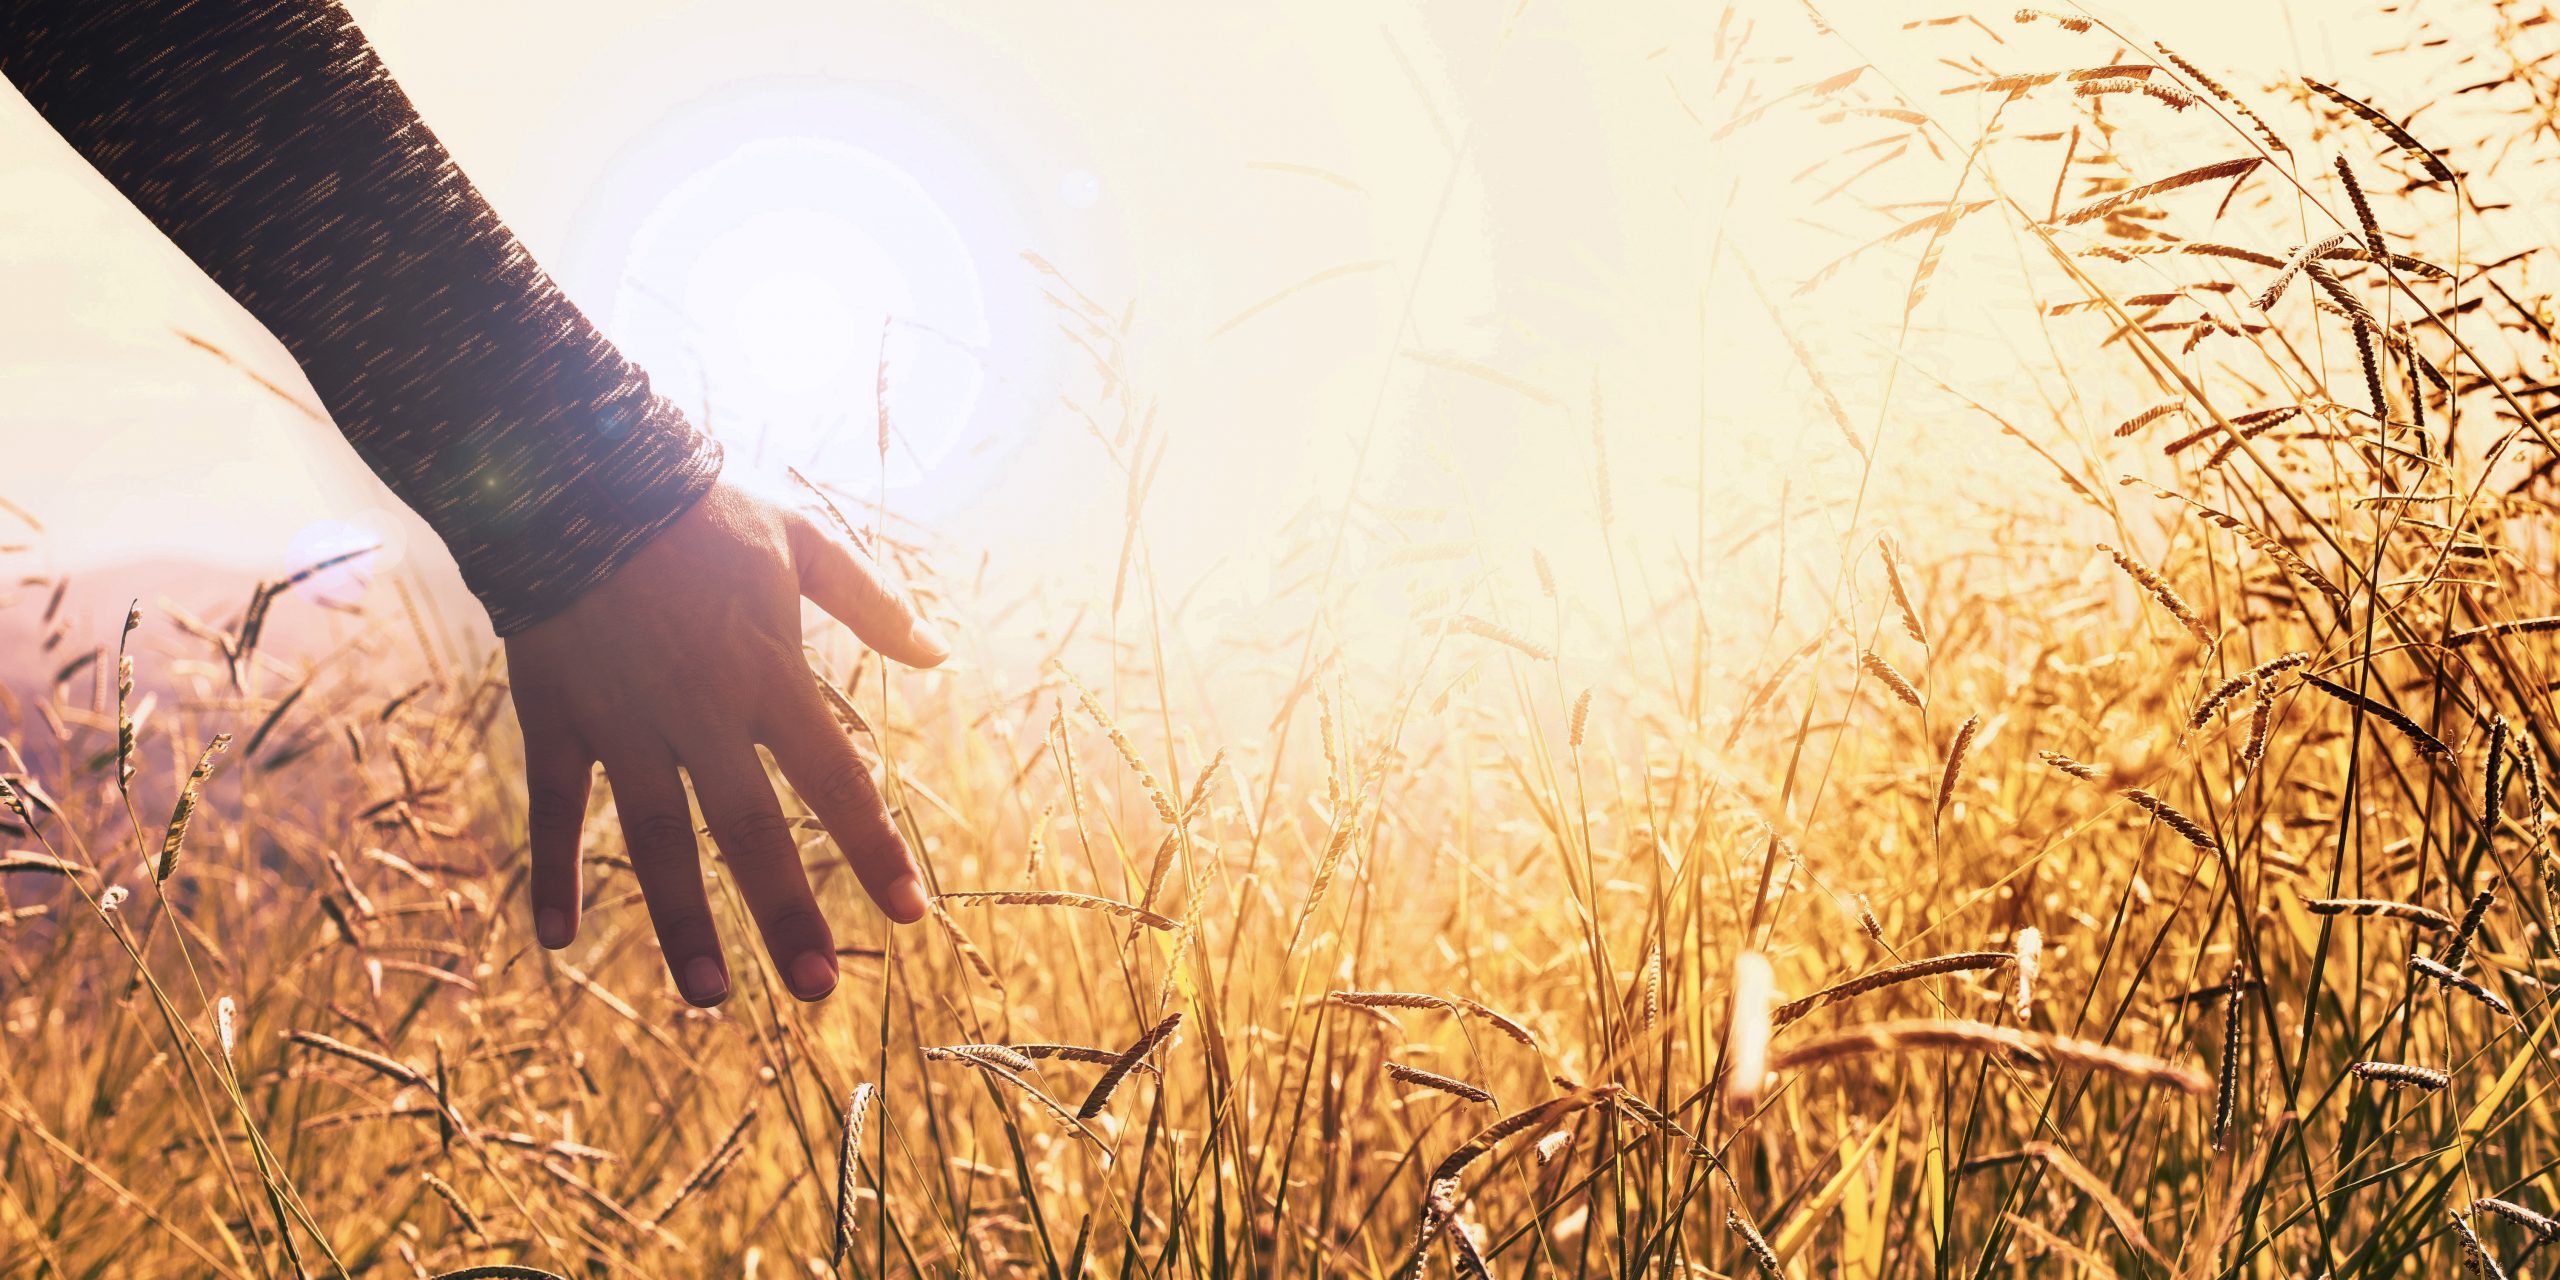 Hands in the grass during sunset